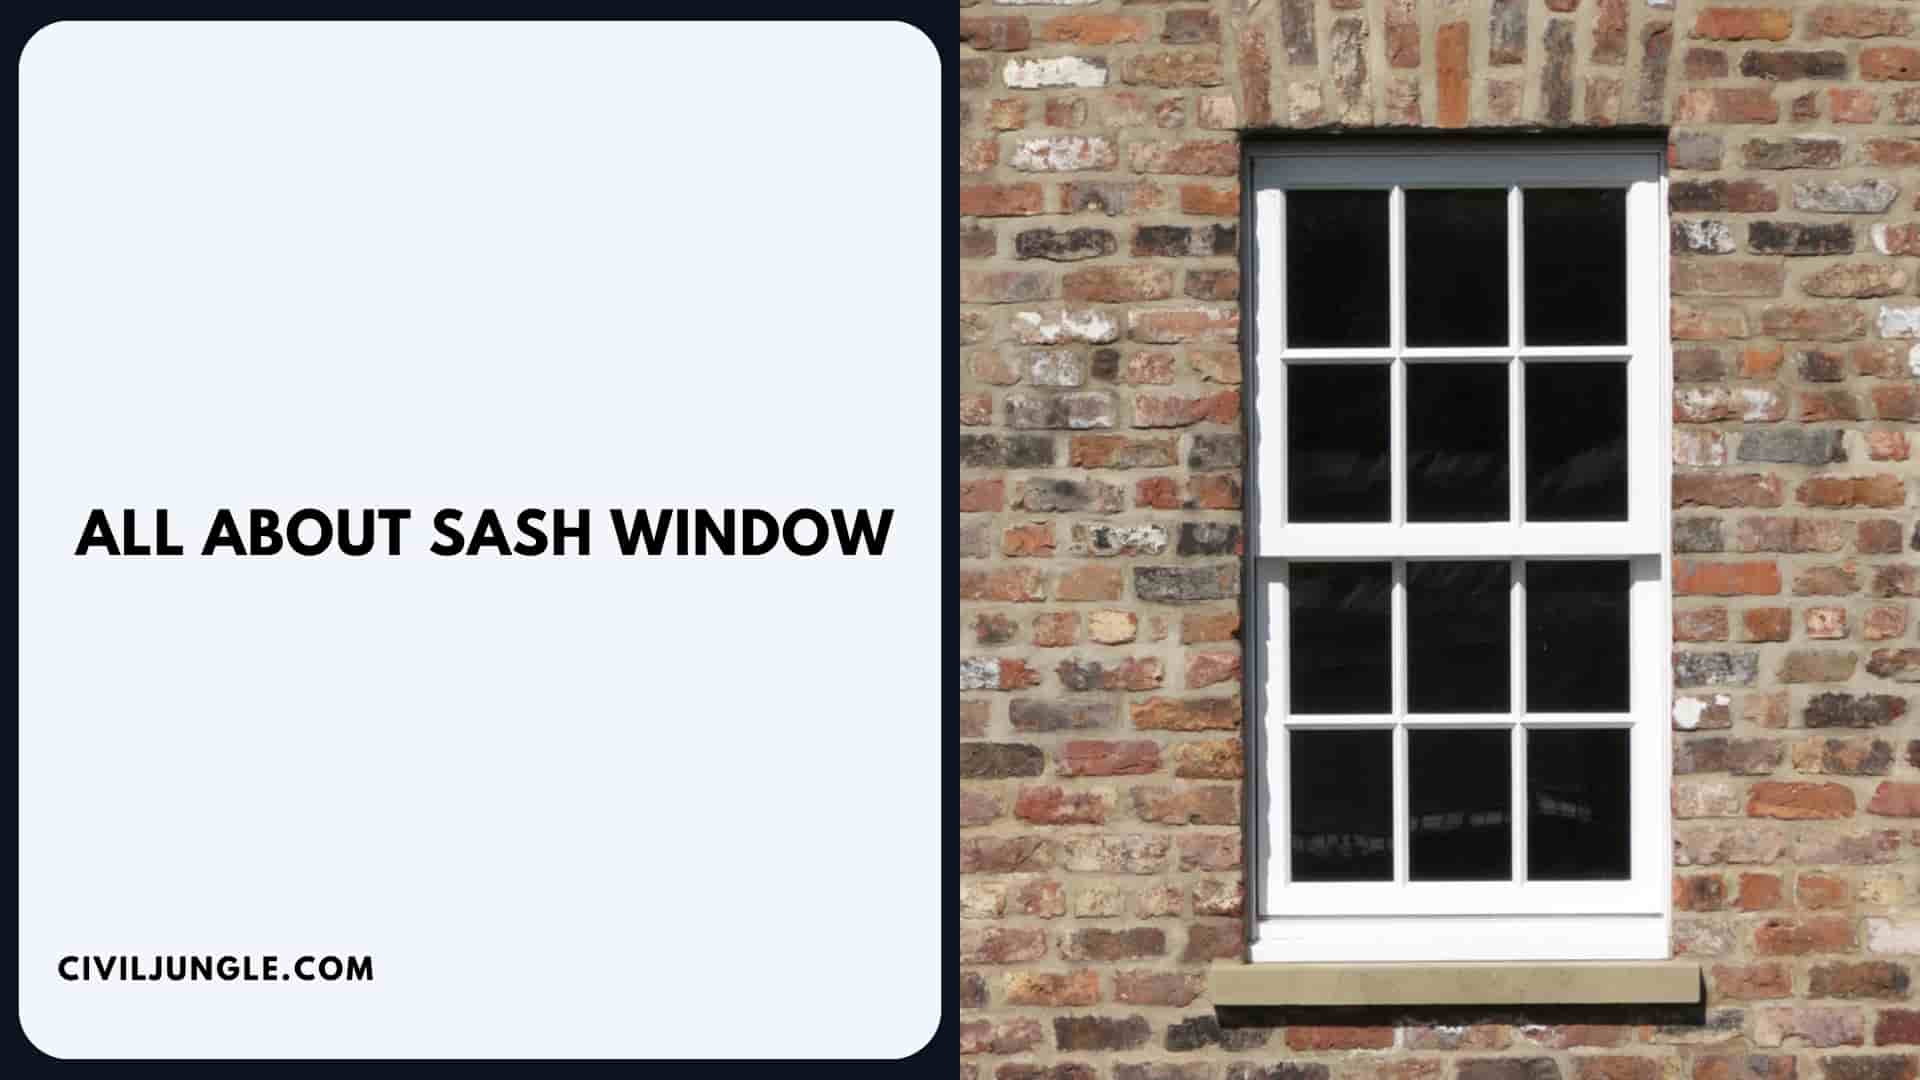 All About Sash Window